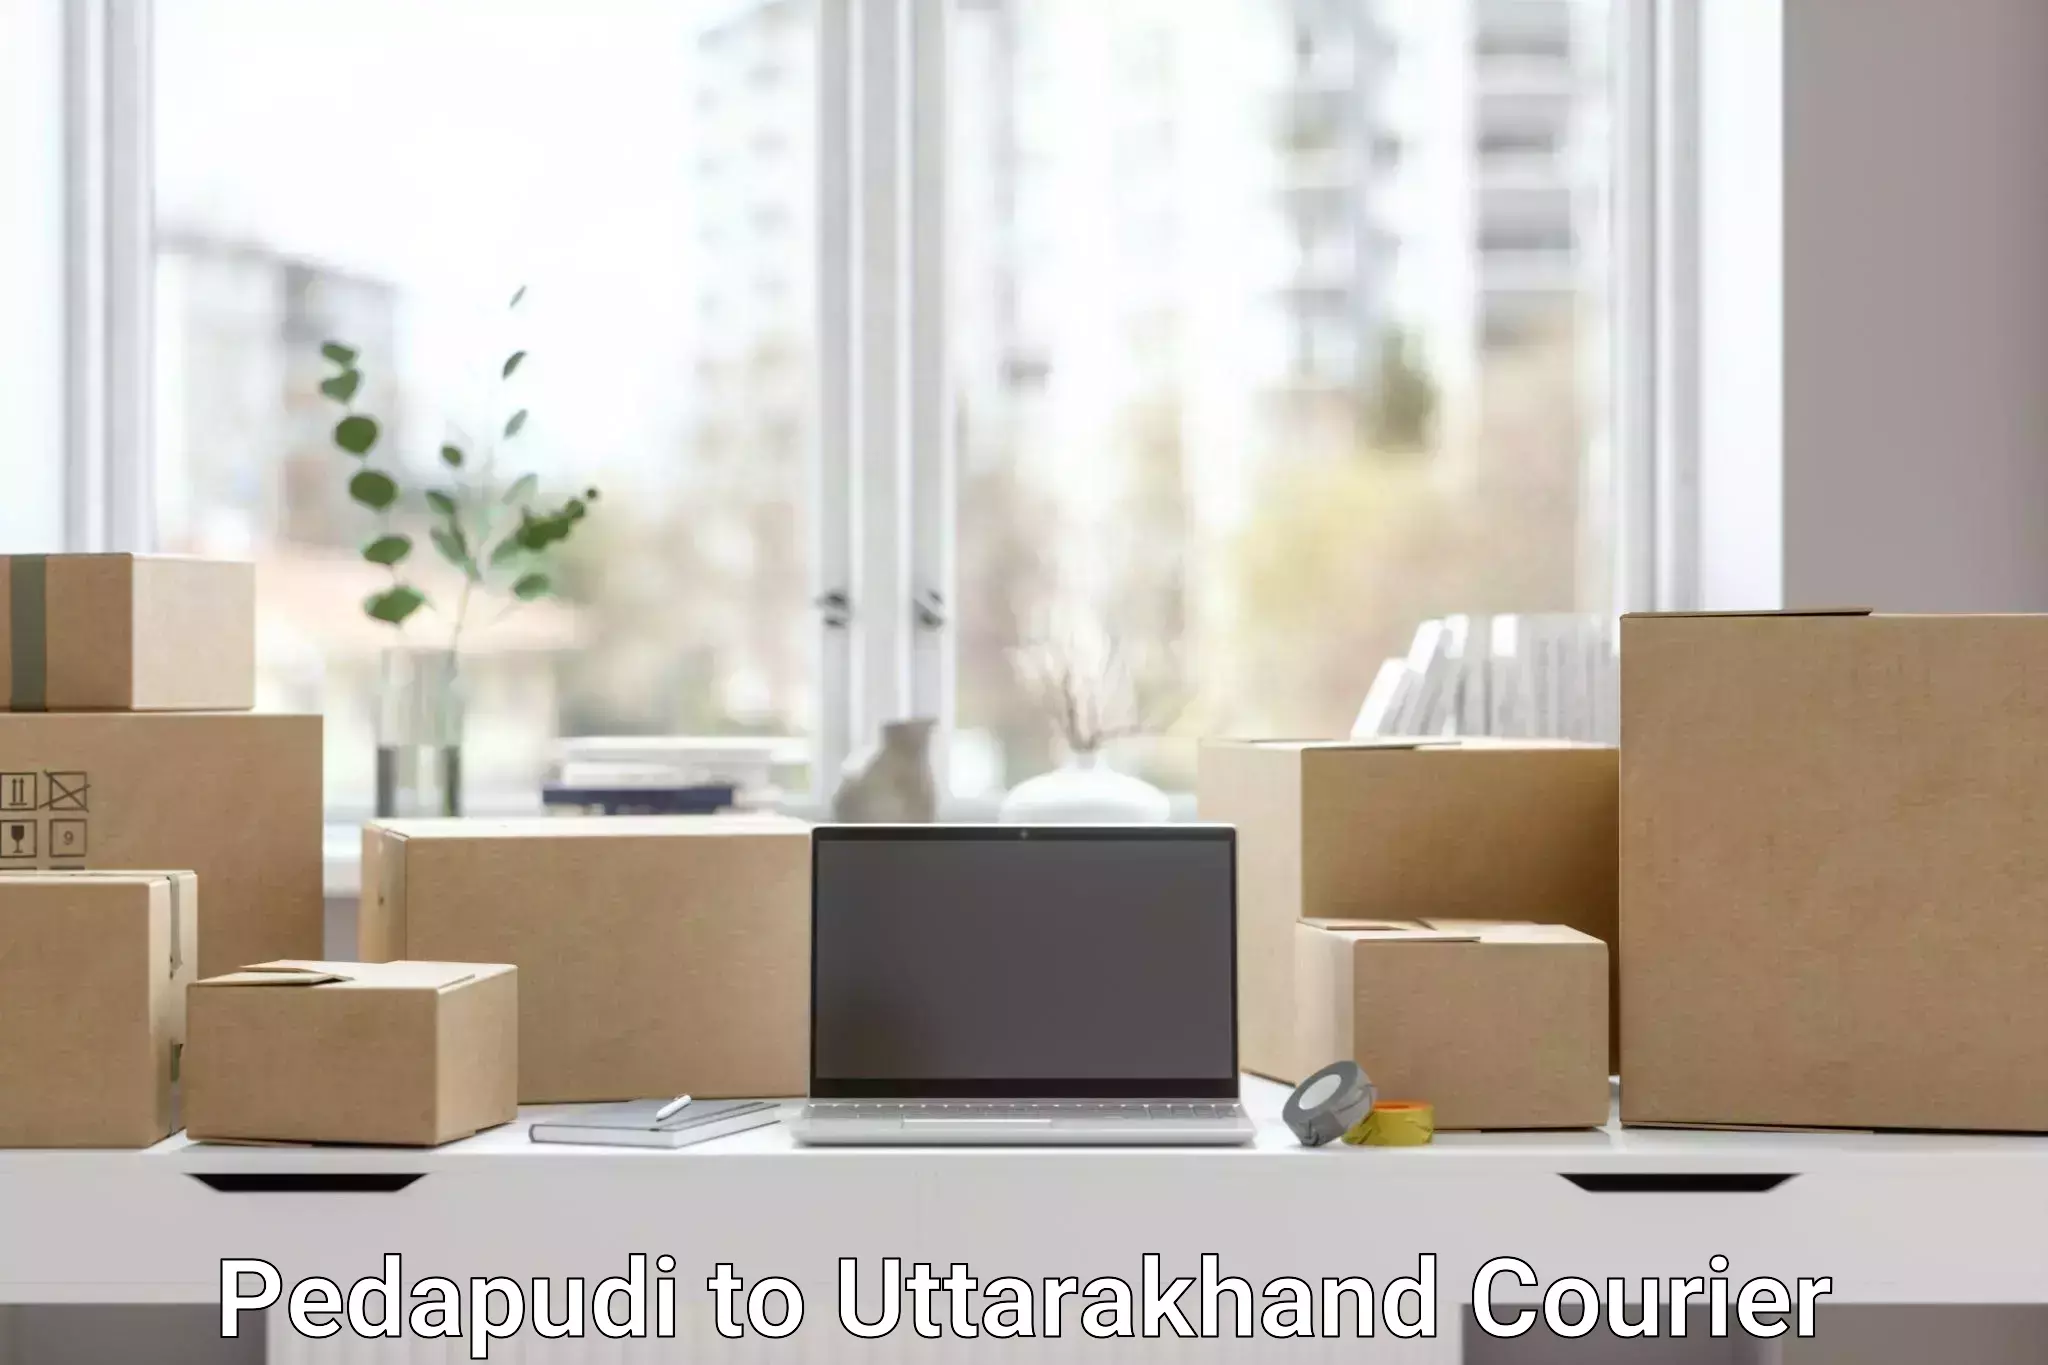 Courier service efficiency Pedapudi to Bhagwanpur